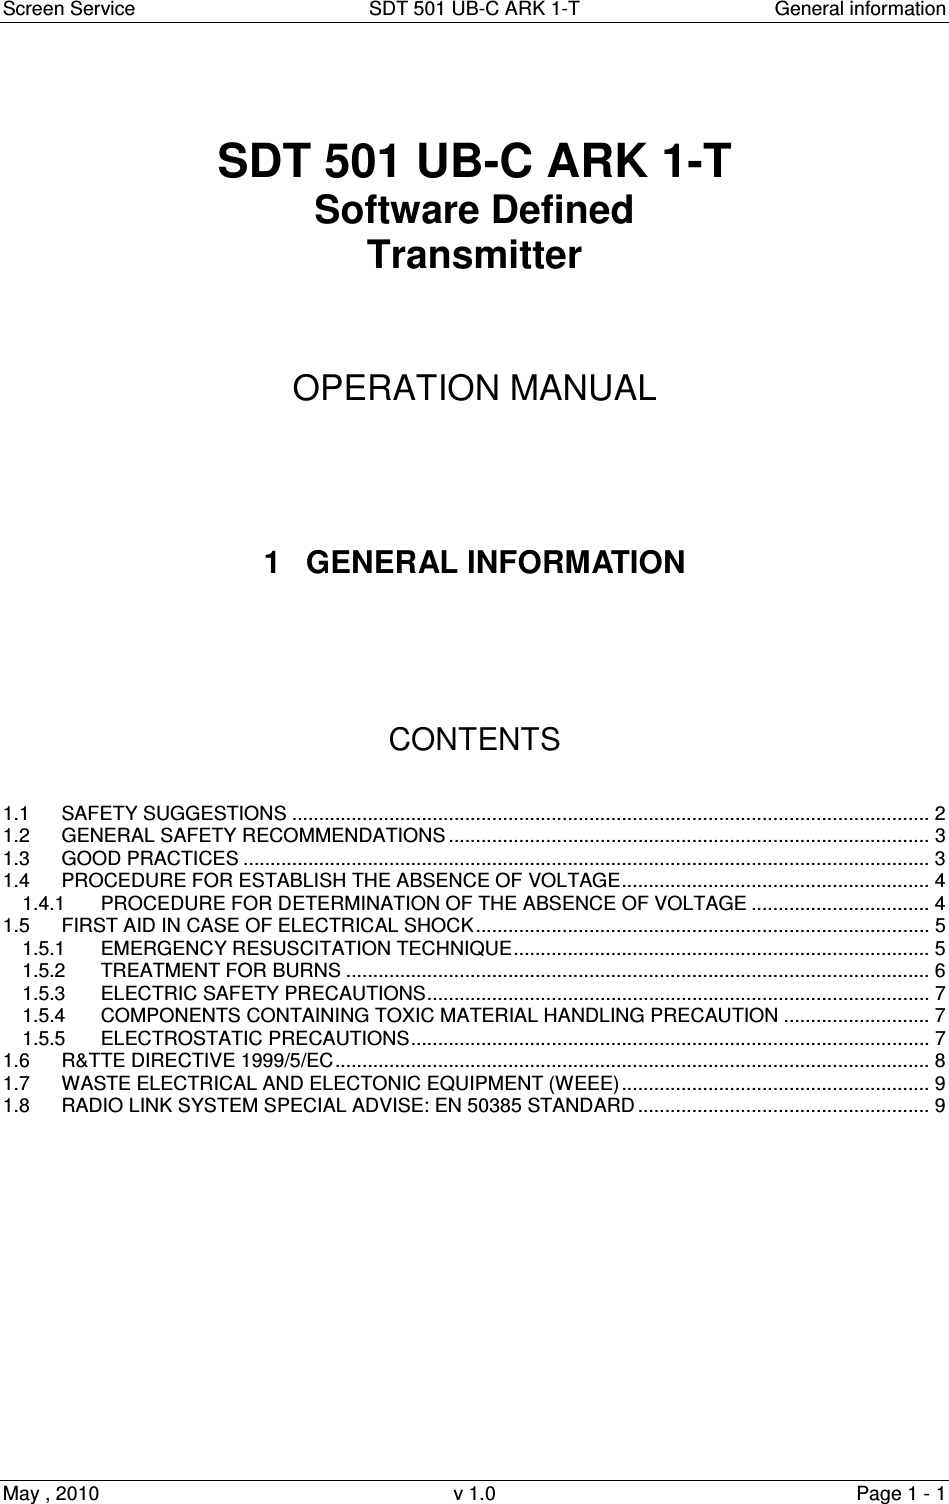 Screen Service  SDT 501 UB-C ARK 1-T  General information May , 2010  v 1.0  Page 1 - 1    SDT 501 UB-C ARK 1-T Software Defined Transmitter     OPERATION MANUAL      1  GENERAL INFORMATION       CONTENTS   1.1 SAFETY SUGGESTIONS ...................................................................................................................... 2 1.2 GENERAL SAFETY RECOMMENDATIONS ......................................................................................... 3 1.3 GOOD PRACTICES ............................................................................................................................... 3 1.4 PROCEDURE FOR ESTABLISH THE ABSENCE OF VOLTAGE......................................................... 4 1.4.1 PROCEDURE FOR DETERMINATION OF THE ABSENCE OF VOLTAGE ................................. 4 1.5 FIRST AID IN CASE OF ELECTRICAL SHOCK.................................................................................... 5 1.5.1 EMERGENCY RESUSCITATION TECHNIQUE............................................................................. 5 1.5.2 TREATMENT FOR BURNS ............................................................................................................ 6 1.5.3 ELECTRIC SAFETY PRECAUTIONS............................................................................................. 7 1.5.4 COMPONENTS CONTAINING TOXIC MATERIAL HANDLING PRECAUTION ........................... 7 1.5.5 ELECTROSTATIC PRECAUTIONS................................................................................................ 7 1.6 R&amp;TTE DIRECTIVE 1999/5/EC.............................................................................................................. 8 1.7 WASTE ELECTRICAL AND ELECTONIC EQUIPMENT (WEEE)......................................................... 9 1.8 RADIO LINK SYSTEM SPECIAL ADVISE: EN 50385 STANDARD ...................................................... 9               